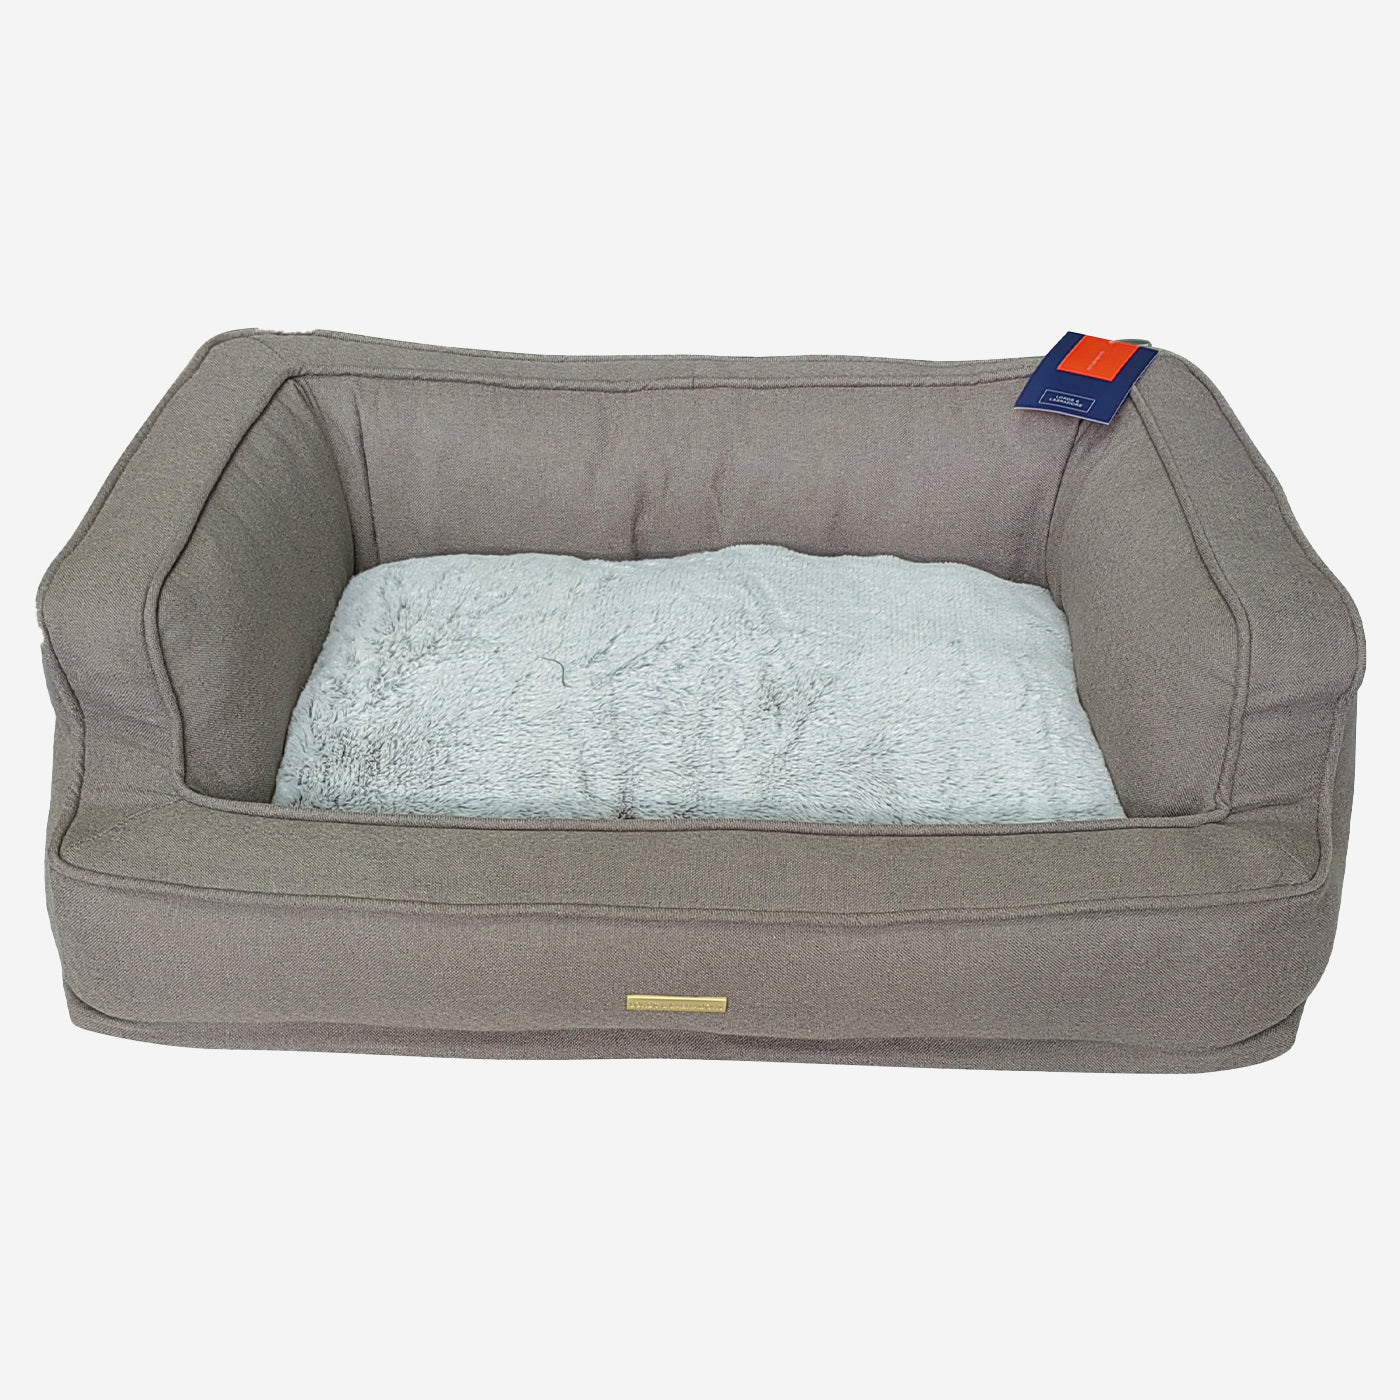 Present Your Furry Friend with the Perfect Dog Bed for The Ultimate Pet Nap-Time! Discover Our Luxury Deep Sleep Dog Bed In Stunning Putty! Available Now at Lords & Labradors US